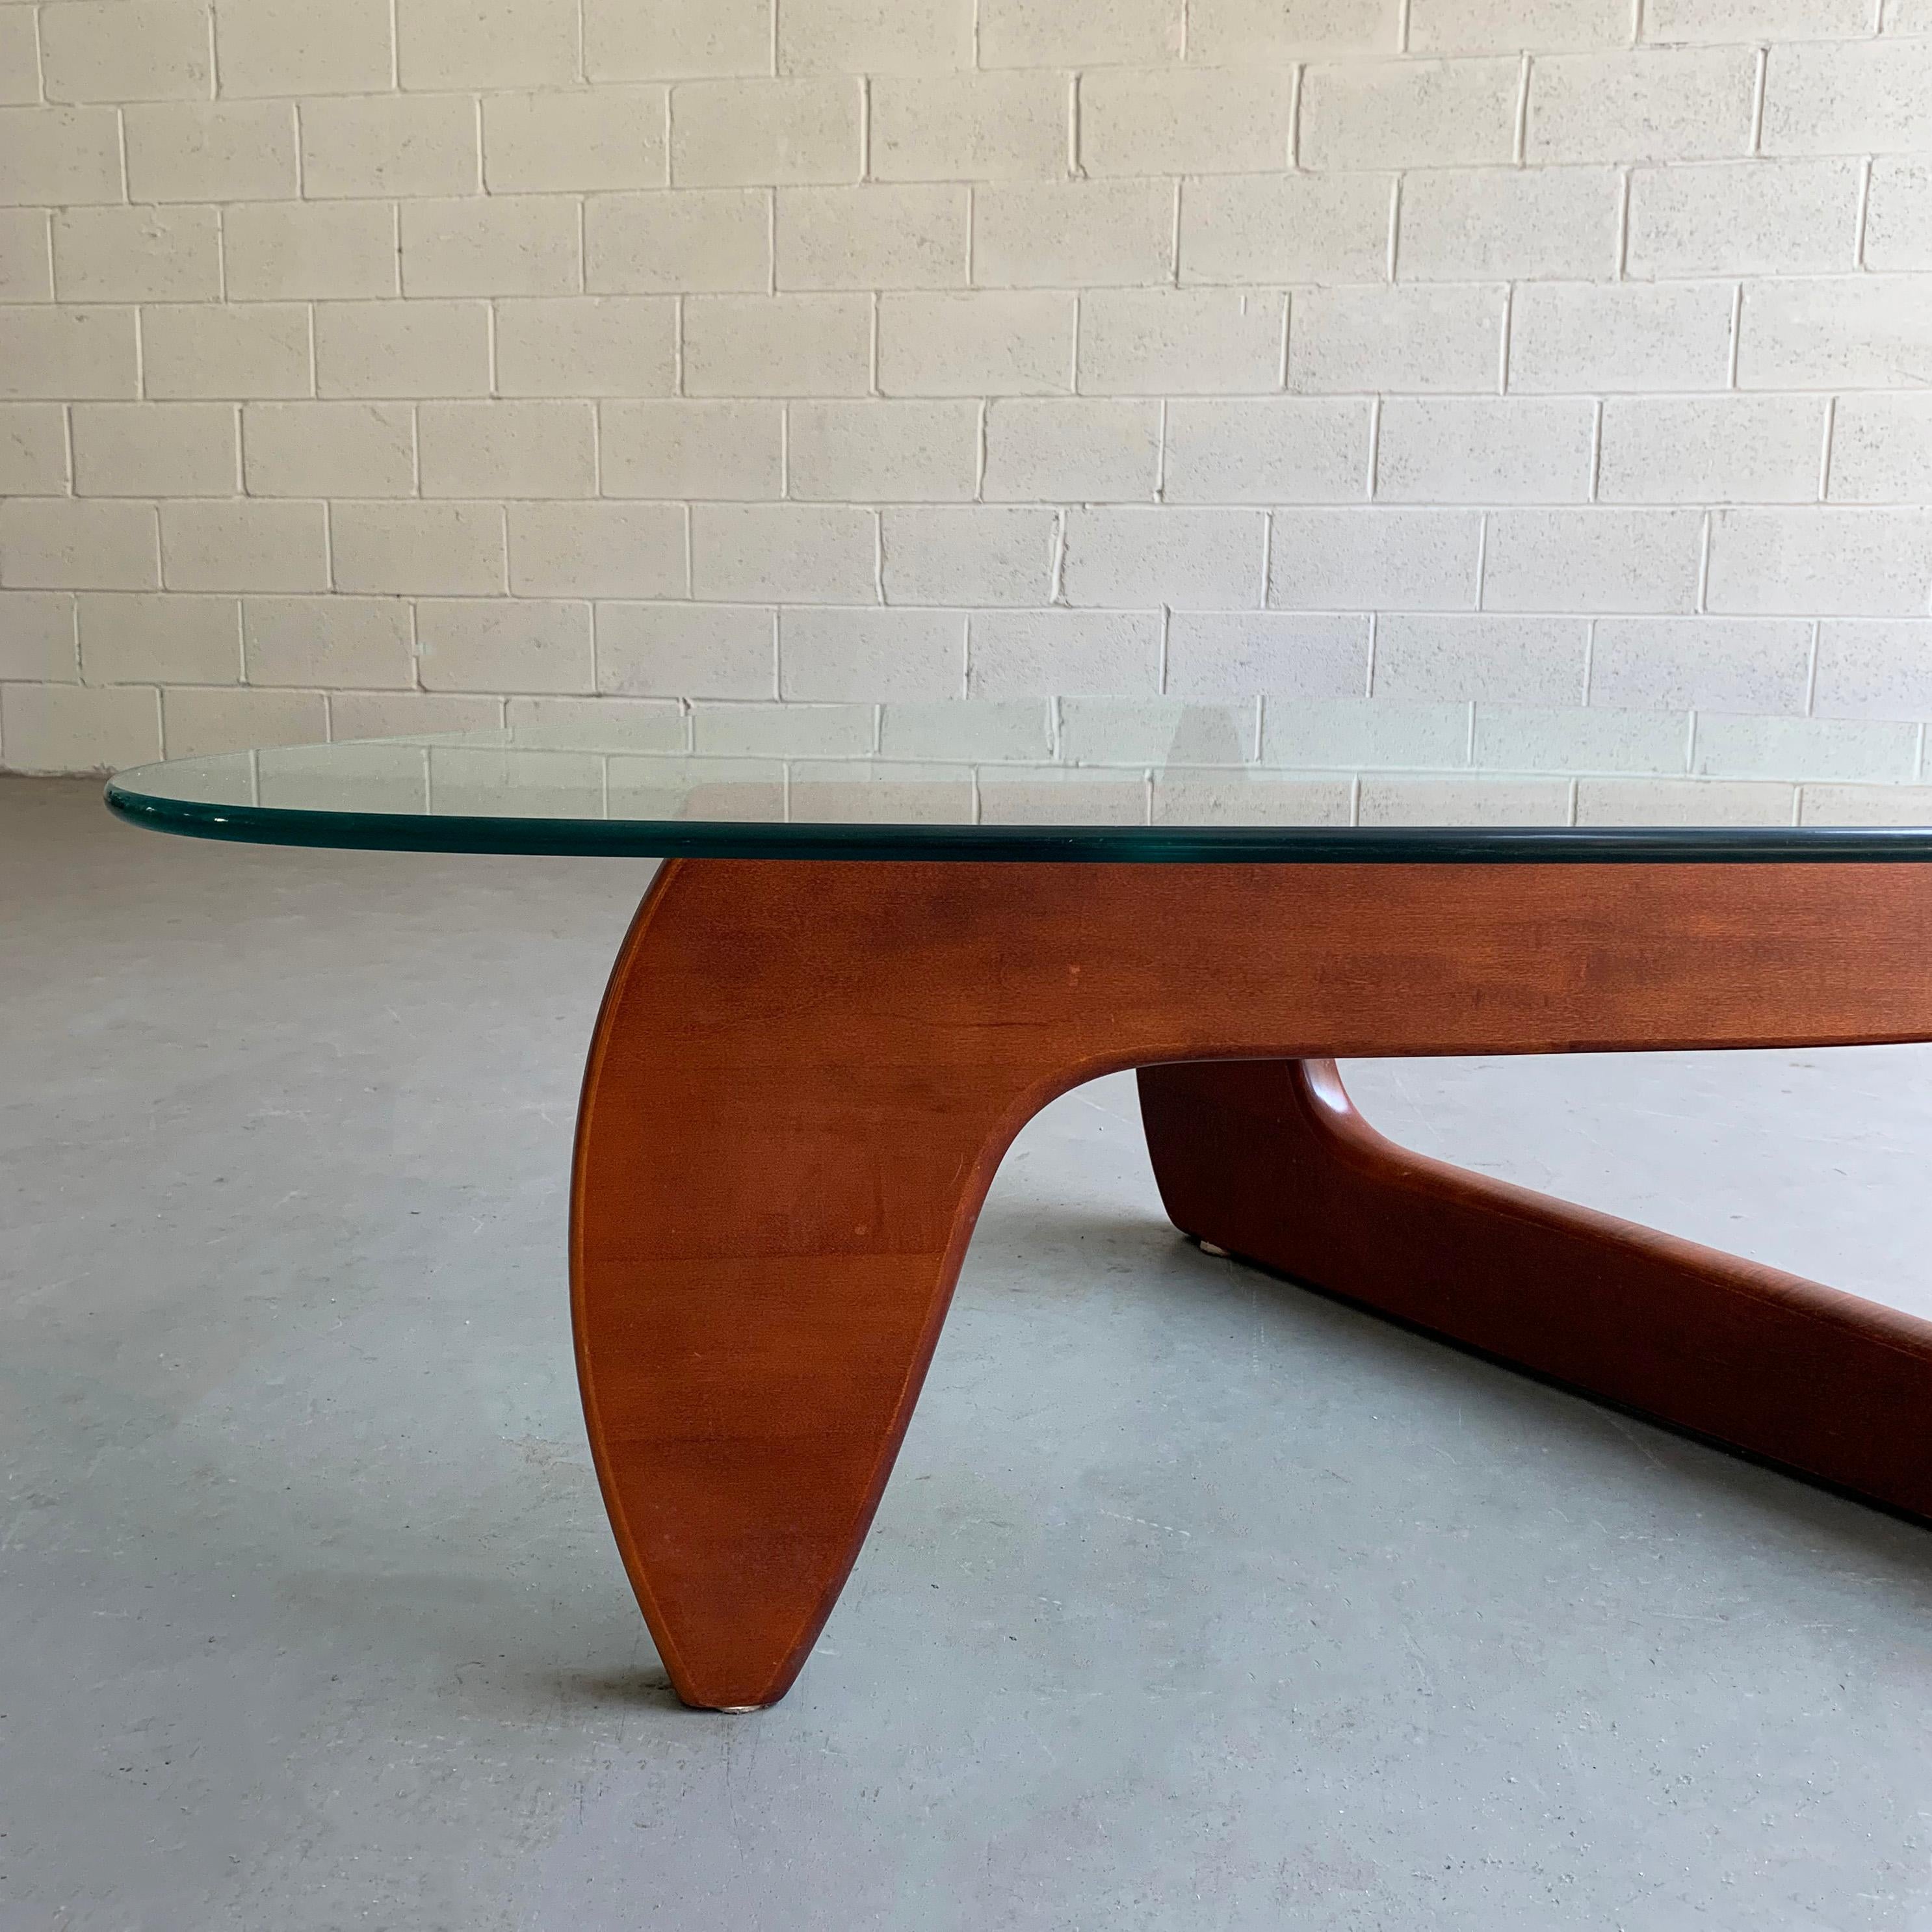 20th Century Biomorphic Coffee Table in the Style of Isamu Noguchi